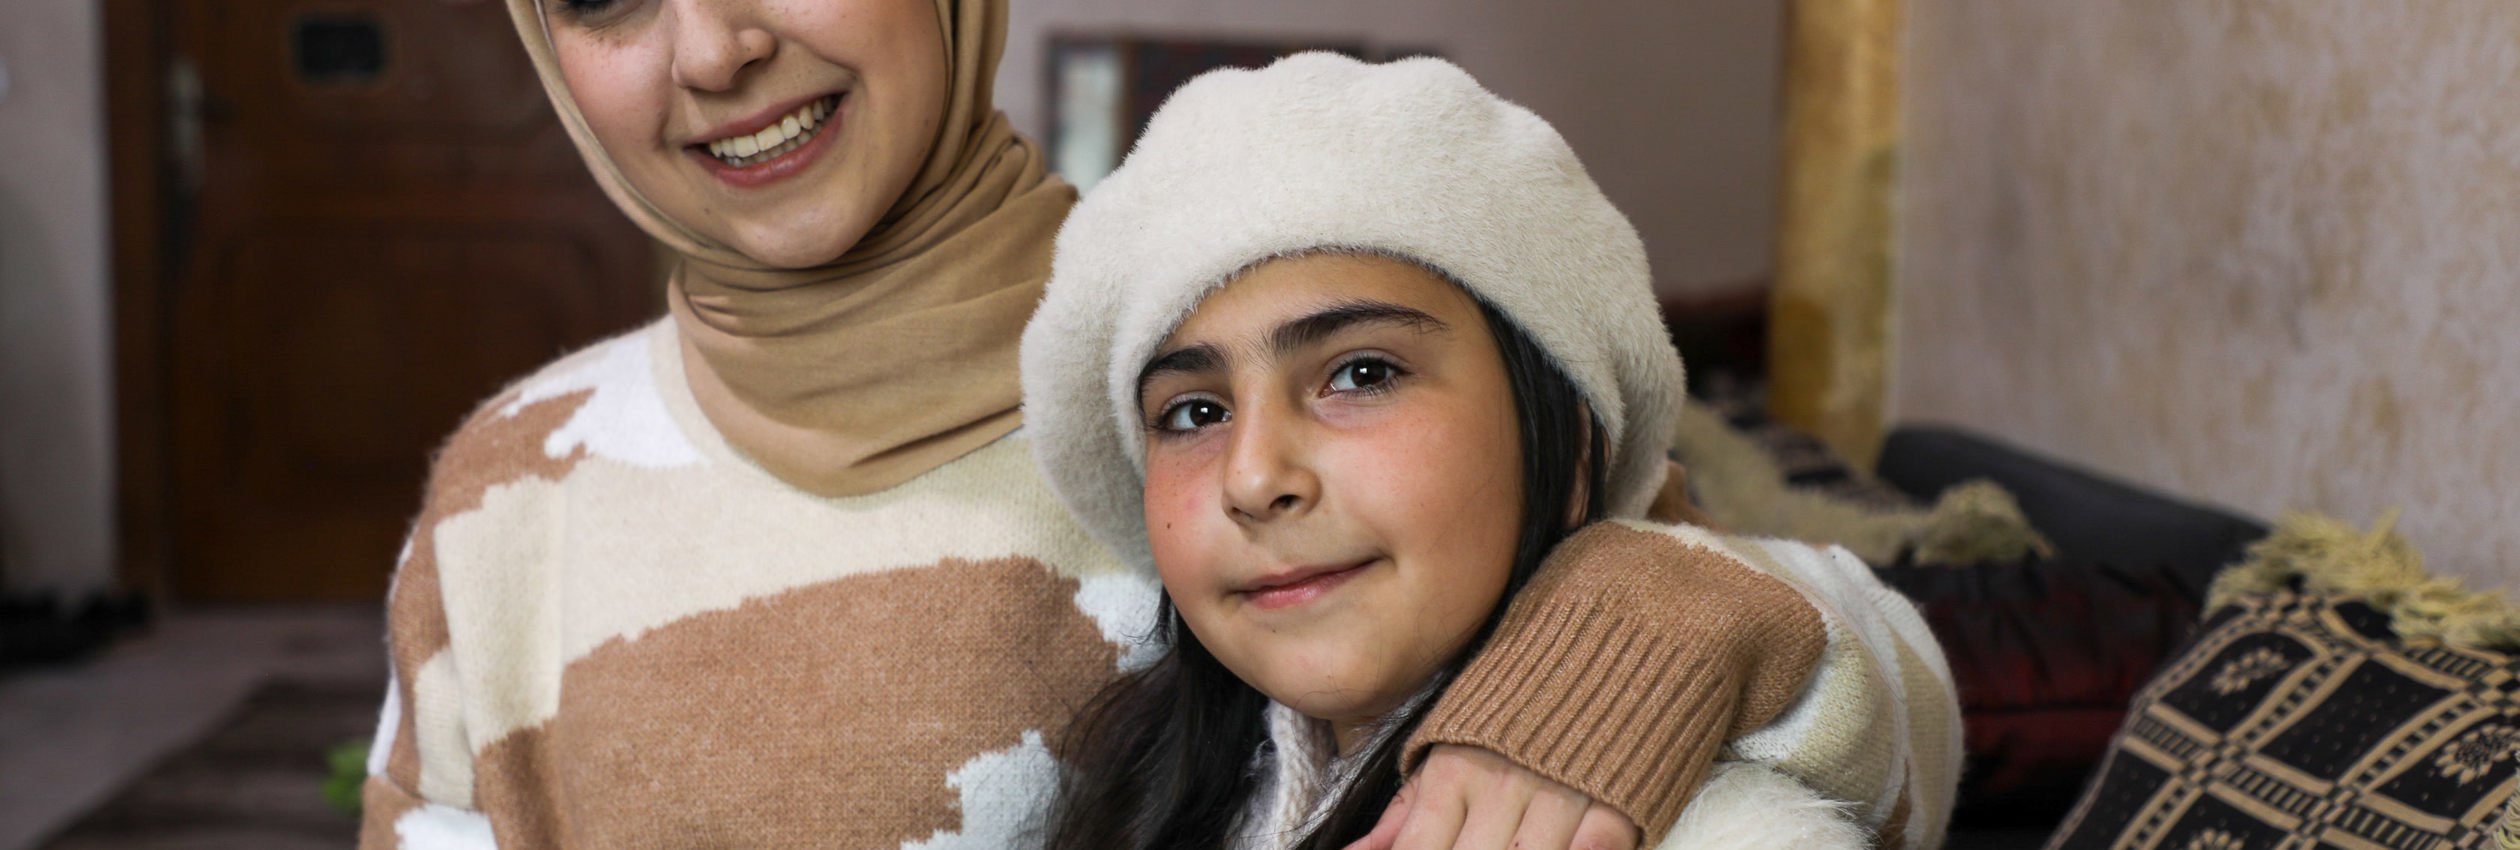 Aya, 20, a Syrian refugee in Jordan is pictured with her younger sister Turkia, 10.